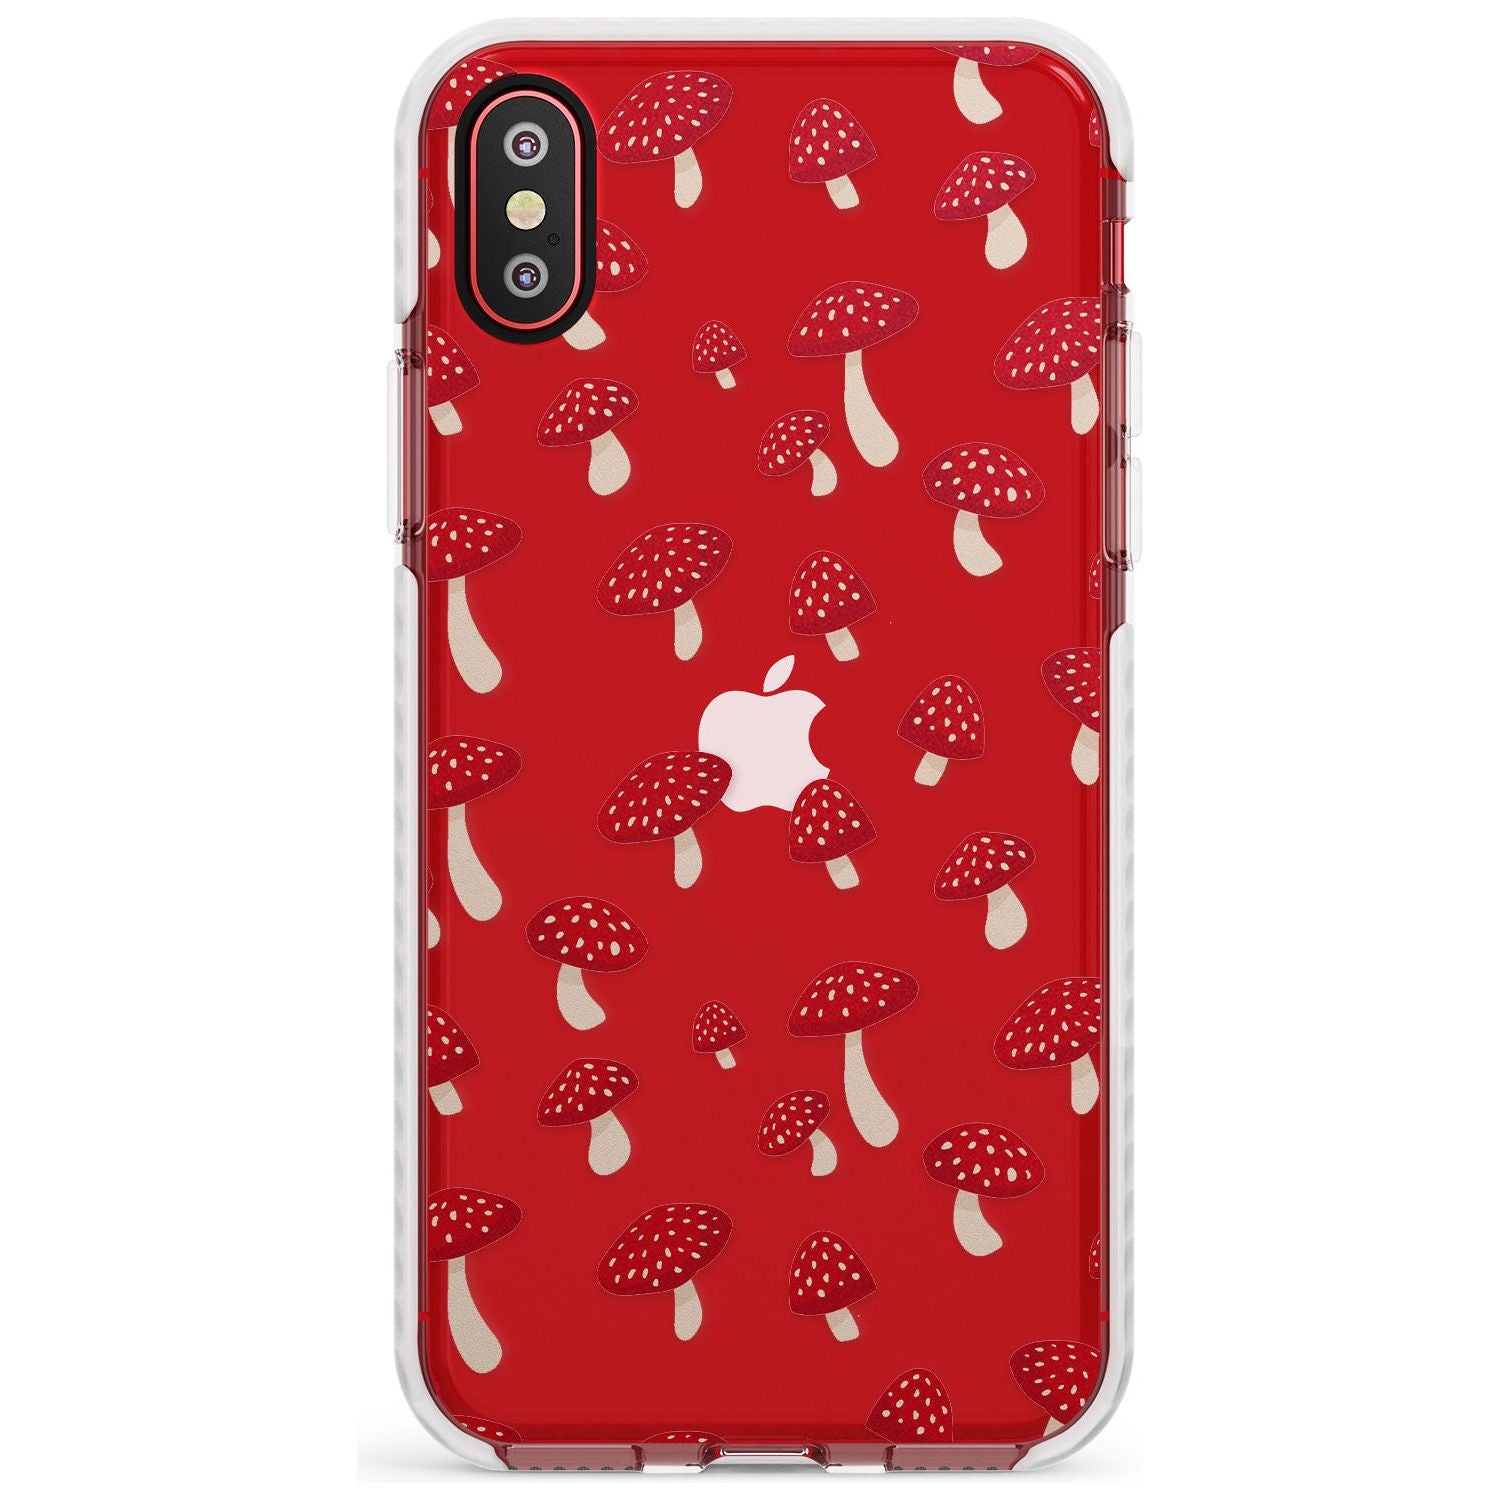 Magical Mushrooms Pattern Impact Phone Case for iPhone X XS Max XR